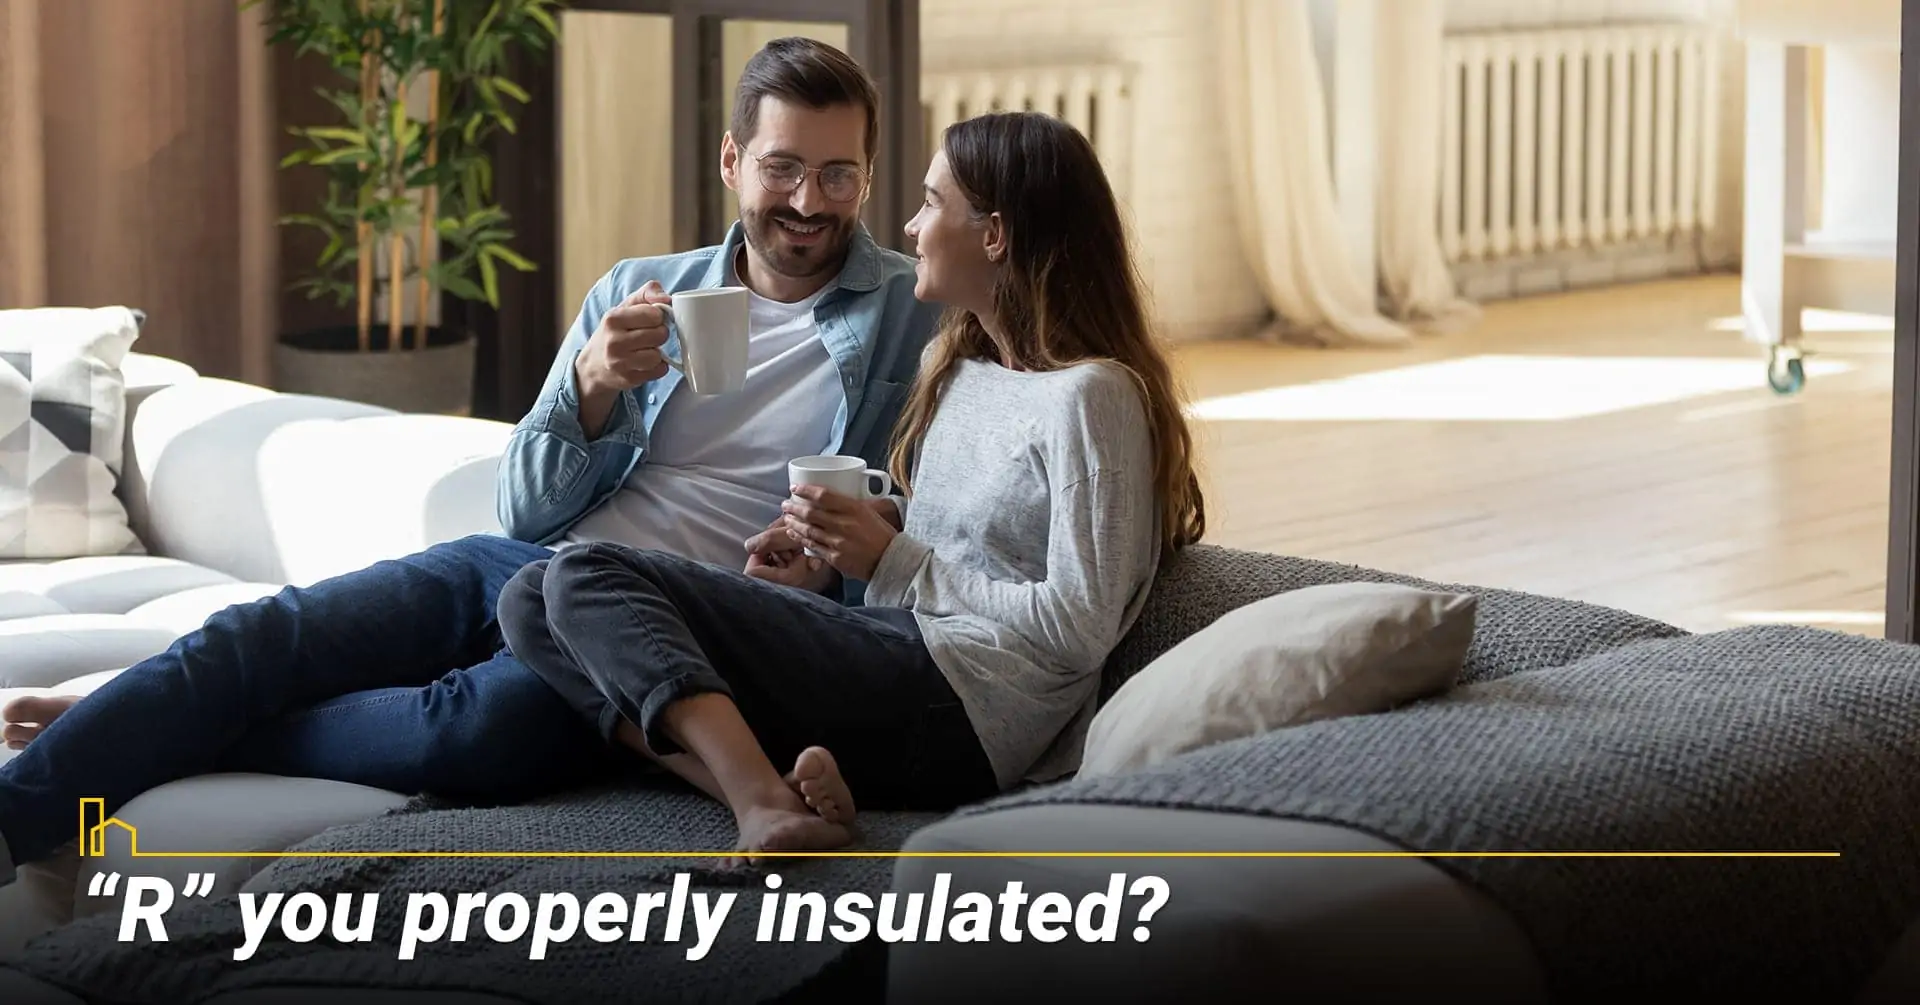 “R” you properly insulated? Insulation for your house, know the R values